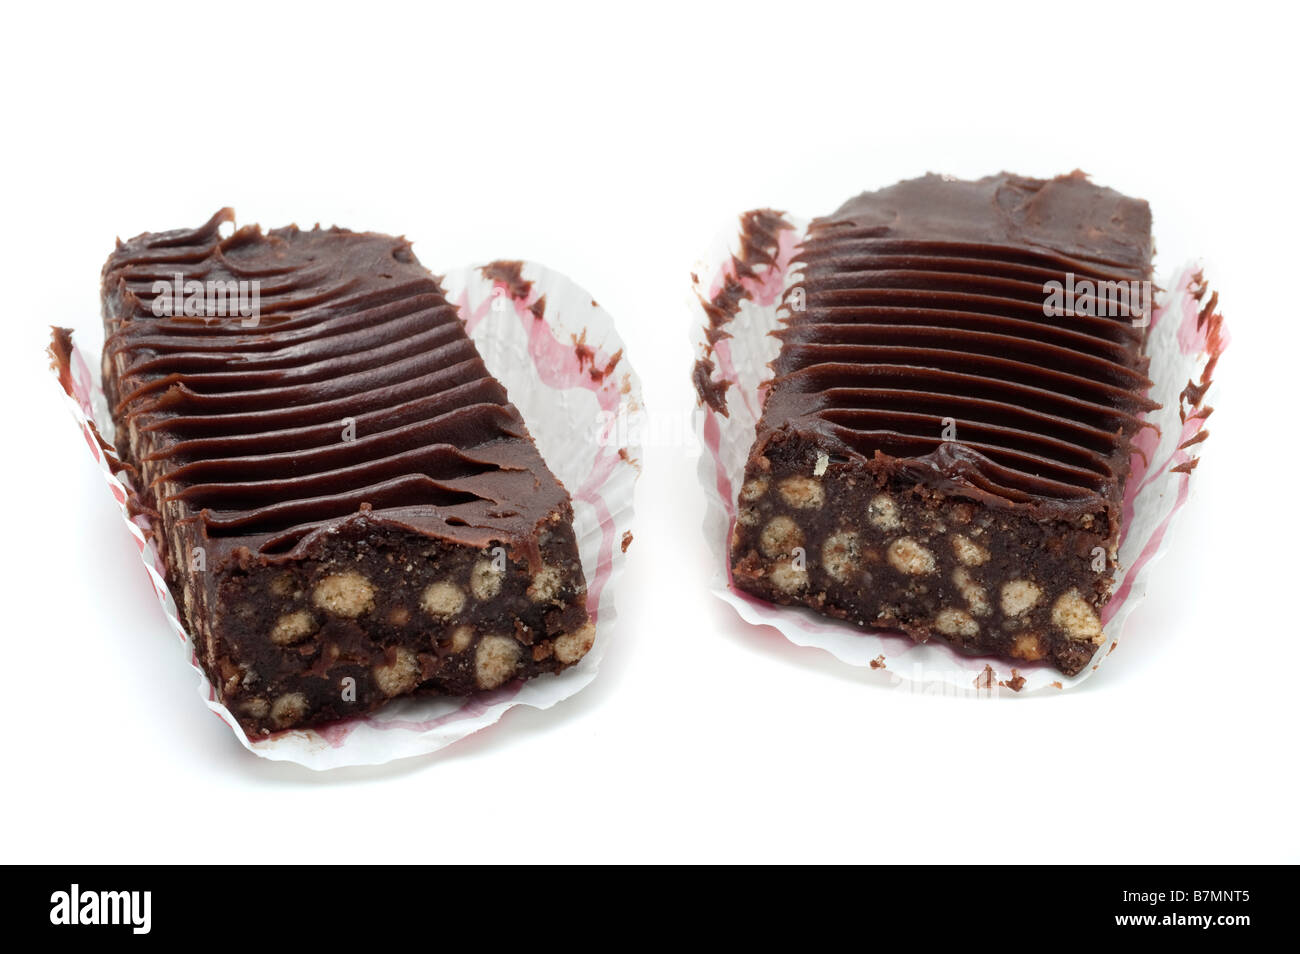 Two 2 chocolate slices with biscuit in paper cases Stock Photo